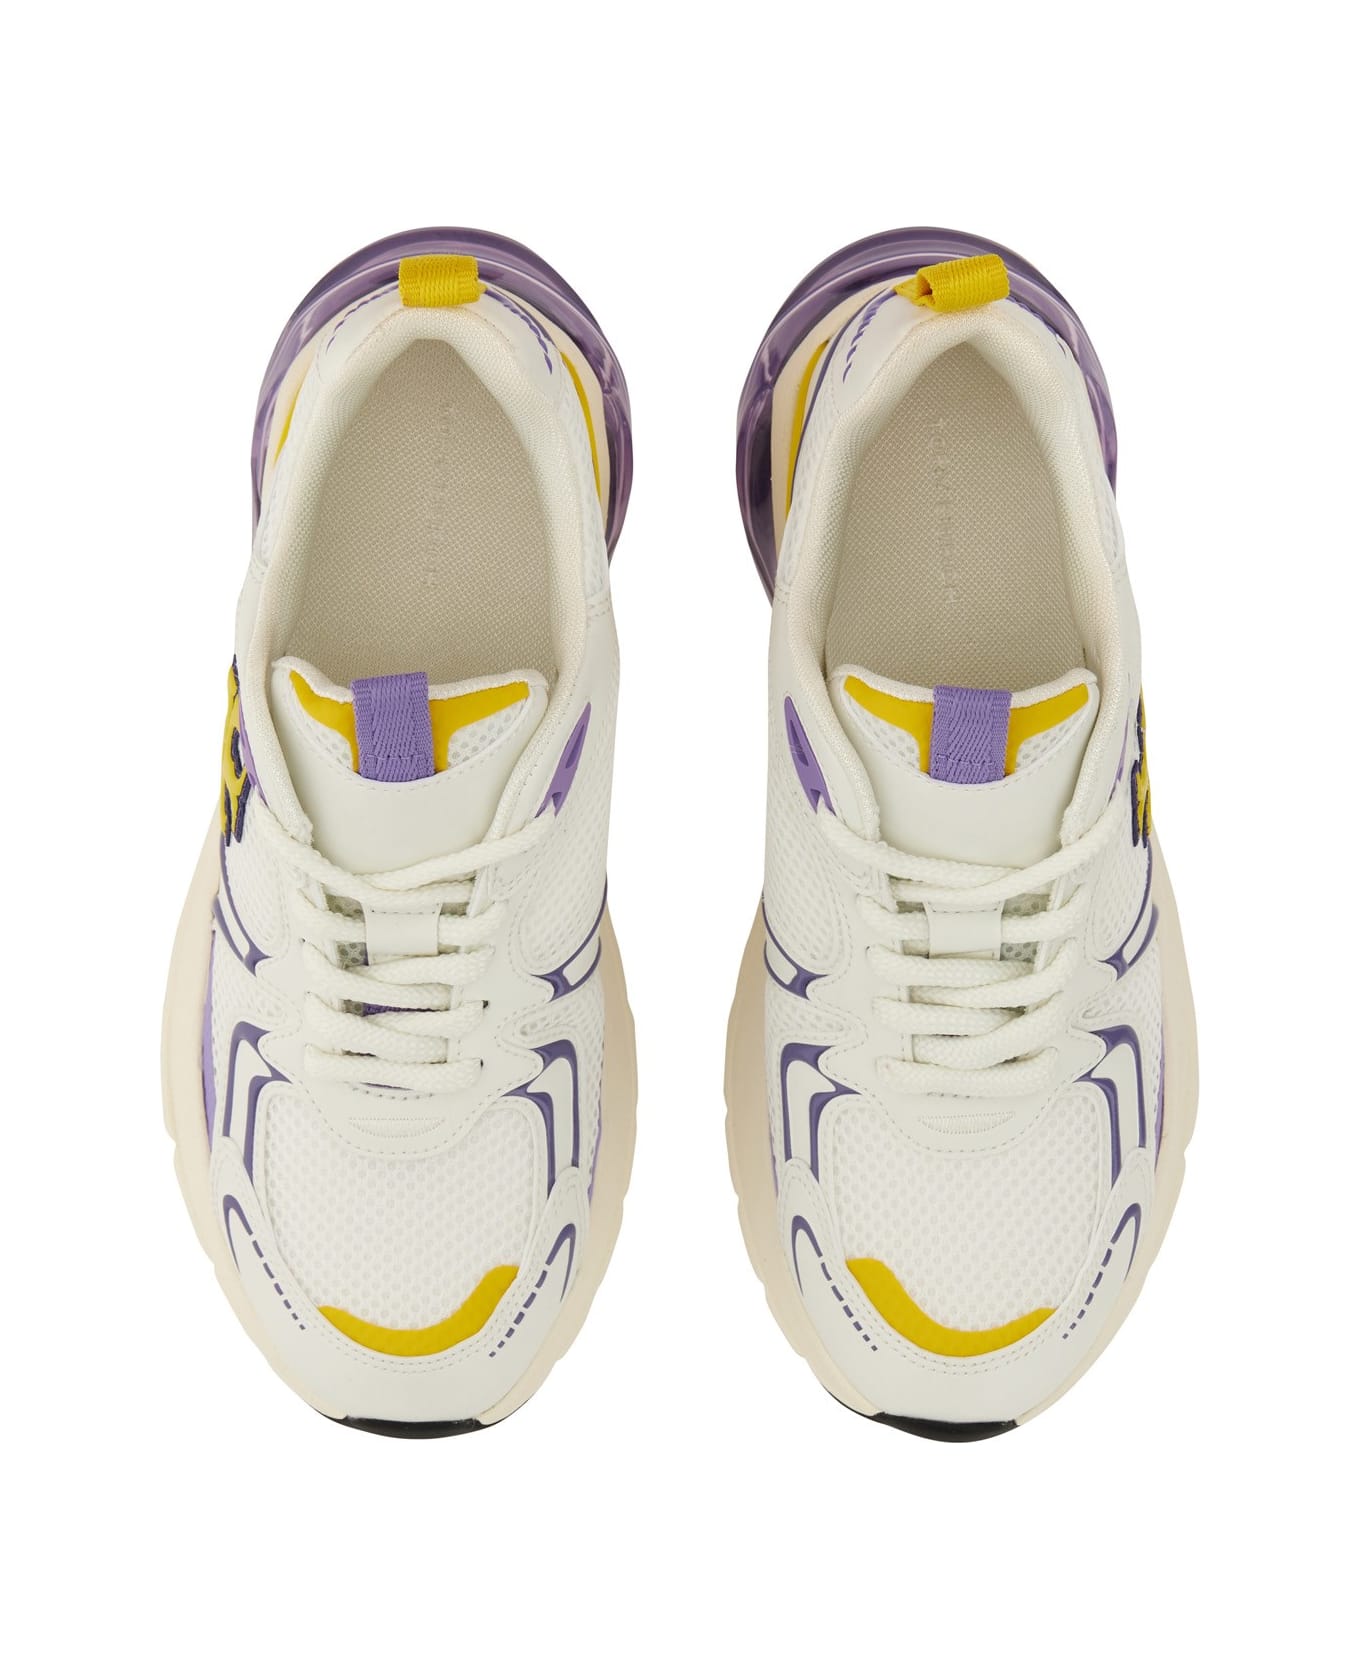 Tory Burch Good Luck Technical Sneaker - MULTICOLOR